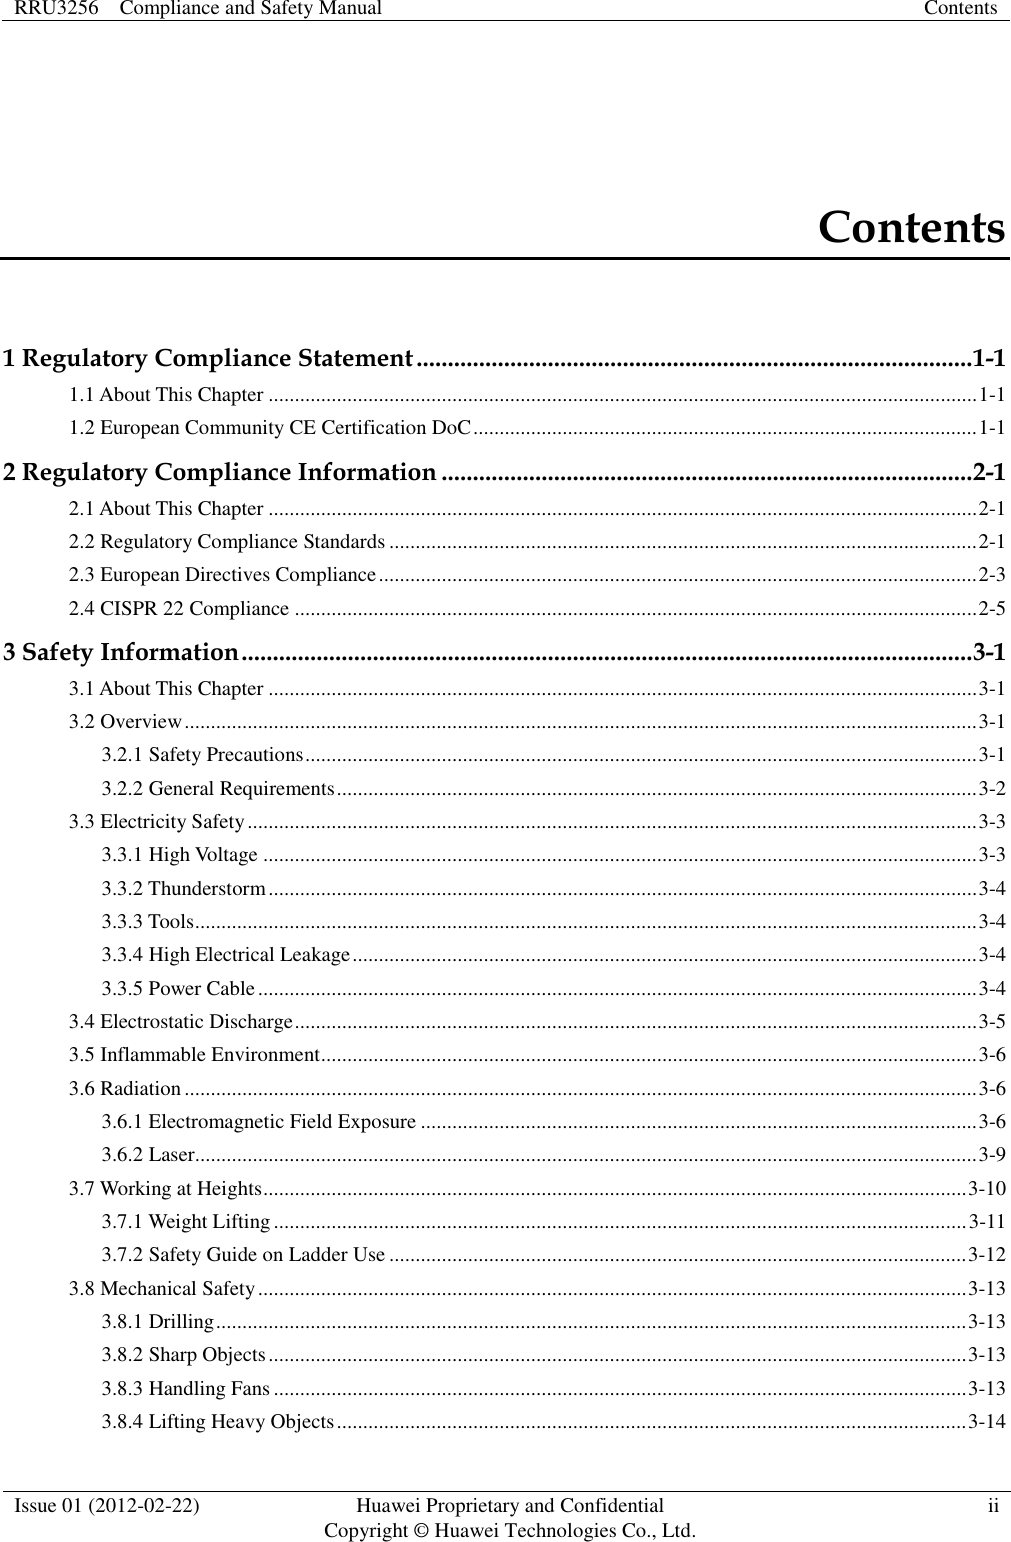 RRU3256    Compliance and Safety Manual Contents  Issue 01 (2012-02-22) Huawei Proprietary and Confidential           Copyright © Huawei Technologies Co., Ltd. ii  Contents 1 Regulatory Compliance Statement ......................................................................................... 1-1 1.1 About This Chapter ....................................................................................................................................... 1-1 1.2 European Community CE Certification DoC ................................................................................................ 1-1 2 Regulatory Compliance Information ..................................................................................... 2-1 2.1 About This Chapter ....................................................................................................................................... 2-1 2.2 Regulatory Compliance Standards ................................................................................................................ 2-1 2.3 European Directives Compliance .................................................................................................................. 2-3 2.4 CISPR 22 Compliance .................................................................................................................................. 2-5 3 Safety Information ..................................................................................................................... 3-1 3.1 About This Chapter ....................................................................................................................................... 3-1 3.2 Overview ....................................................................................................................................................... 3-1 3.2.1 Safety Precautions ................................................................................................................................ 3-1 3.2.2 General Requirements .......................................................................................................................... 3-2 3.3 Electricity Safety ........................................................................................................................................... 3-3 3.3.1 High Voltage ........................................................................................................................................ 3-3 3.3.2 Thunderstorm ....................................................................................................................................... 3-4 3.3.3 Tools ..................................................................................................................................................... 3-4 3.3.4 High Electrical Leakage ....................................................................................................................... 3-4 3.3.5 Power Cable ......................................................................................................................................... 3-4 3.4 Electrostatic Discharge .................................................................................................................................. 3-5 3.5 Inflammable Environment ............................................................................................................................. 3-6 3.6 Radiation ....................................................................................................................................................... 3-6 3.6.1 Electromagnetic Field Exposure .......................................................................................................... 3-6 3.6.2 Laser..................................................................................................................................................... 3-9 3.7 Working at Heights ...................................................................................................................................... 3-10 3.7.1 Weight Lifting .................................................................................................................................... 3-11 3.7.2 Safety Guide on Ladder Use .............................................................................................................. 3-12 3.8 Mechanical Safety ....................................................................................................................................... 3-13 3.8.1 Drilling ............................................................................................................................................... 3-13 3.8.2 Sharp Objects ..................................................................................................................................... 3-13 3.8.3 Handling Fans .................................................................................................................................... 3-13 3.8.4 Lifting Heavy Objects ........................................................................................................................ 3-14 